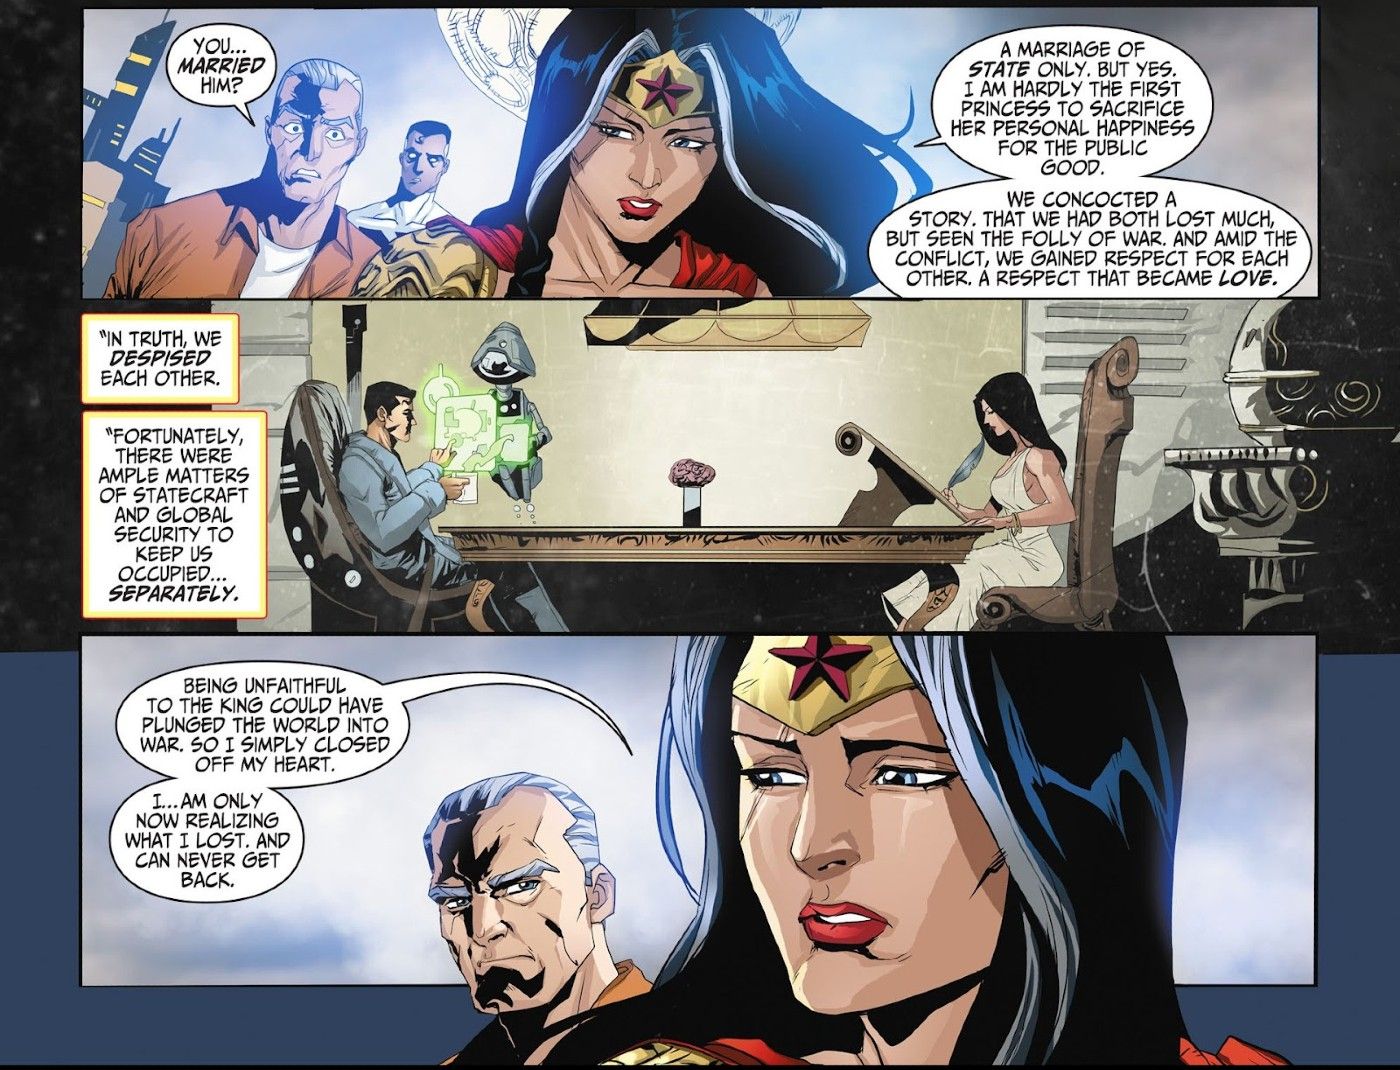 Comic book panels: DCAU Wonder Woman explains to Superman and Batman from her Earth why she married Lord Superman.